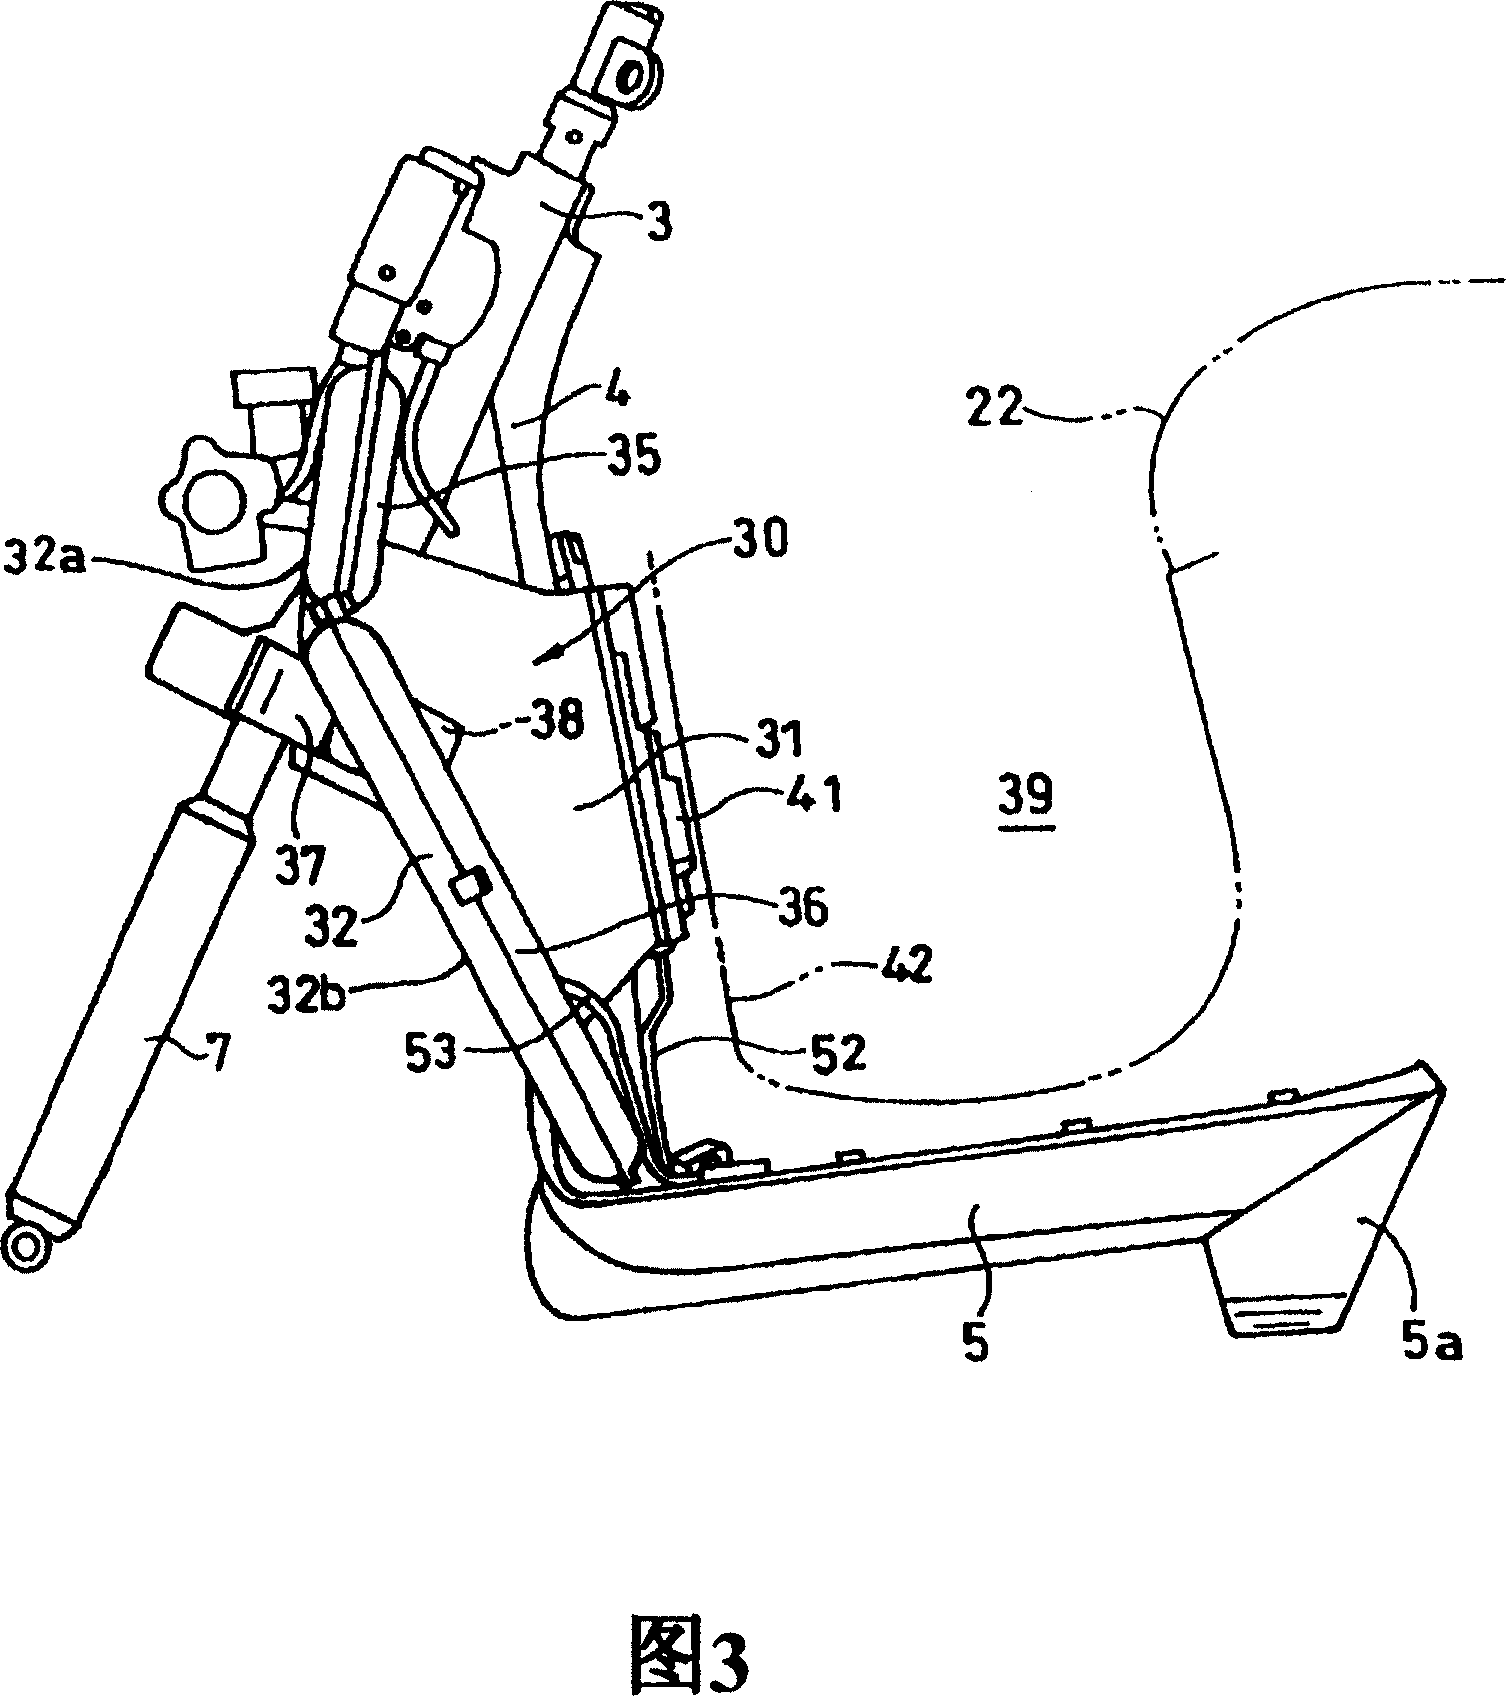 Battery holder of electric vehicle